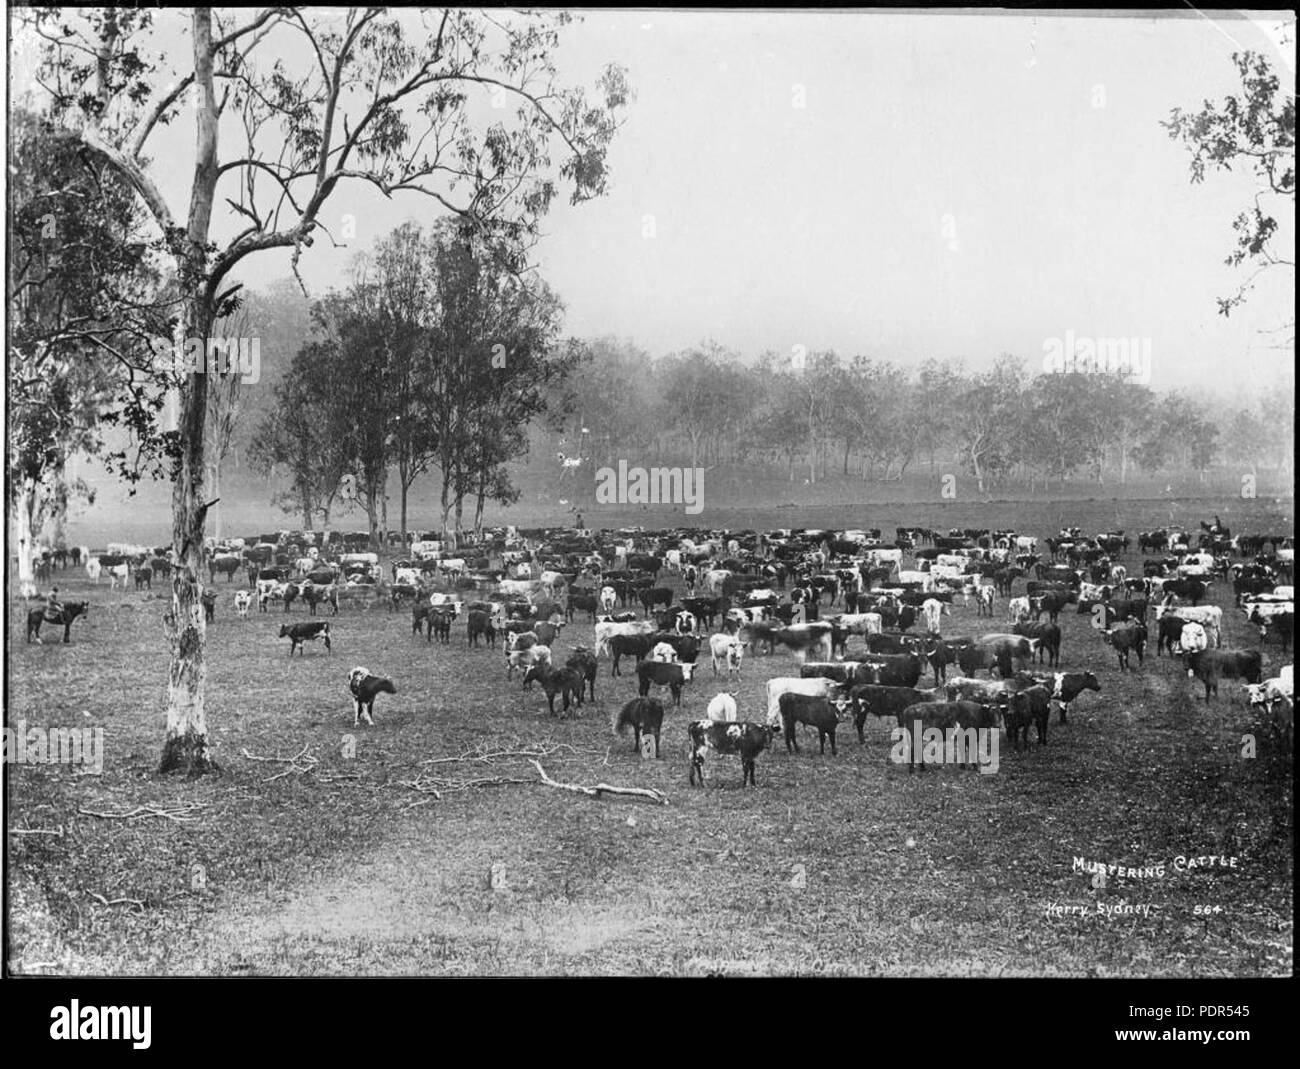 Mustering cattle Black and White Stock Photos & Images - Alamy